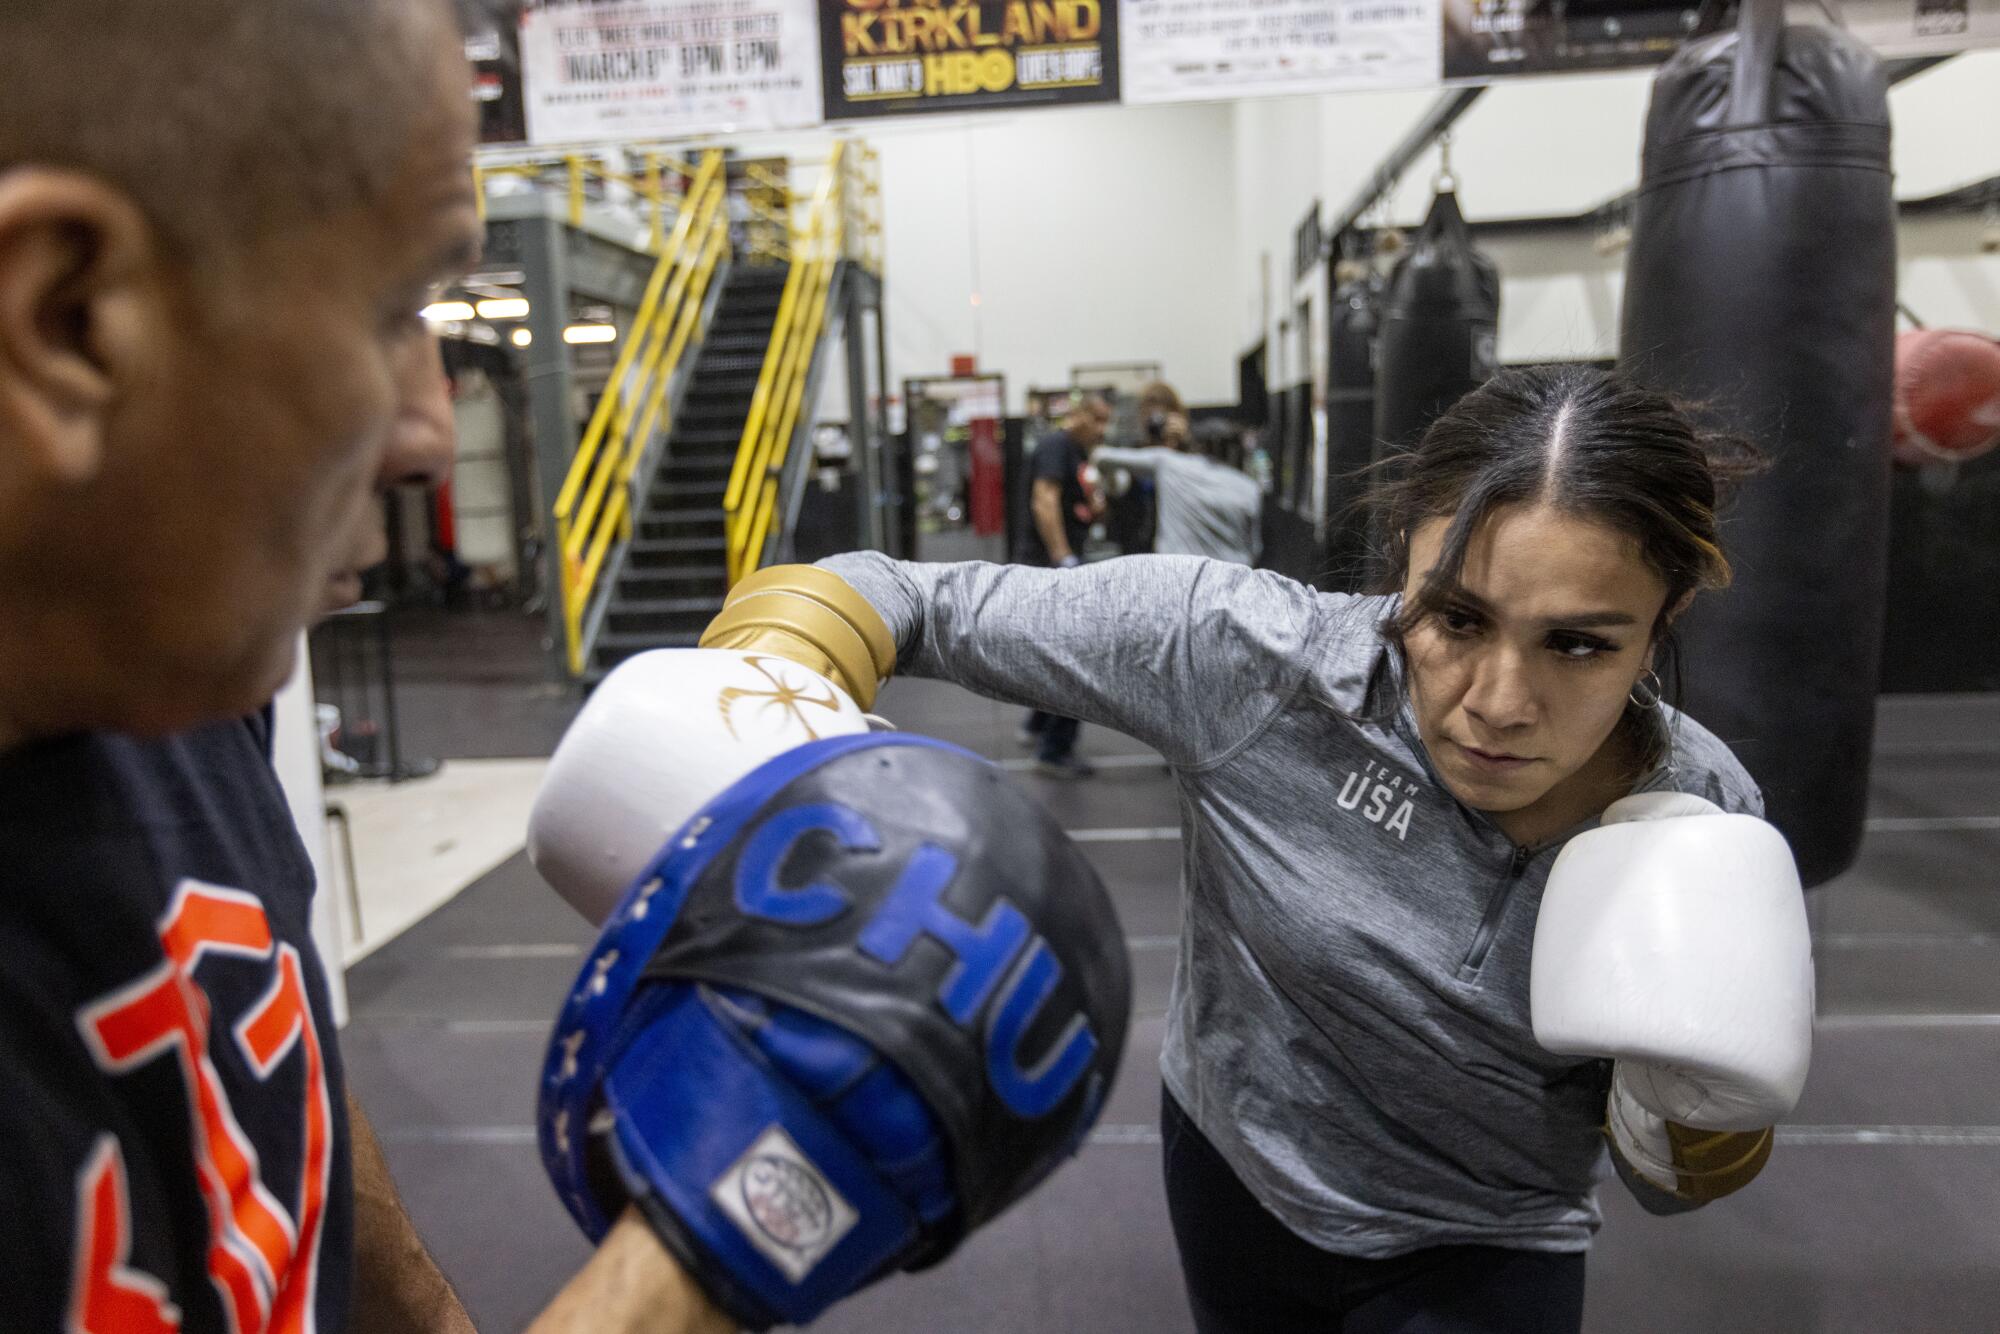 Jajaira Gonzalez trains with her father, Jose "Chuy" Gonzalez, at the CAPE Fitness gym in La Verne.